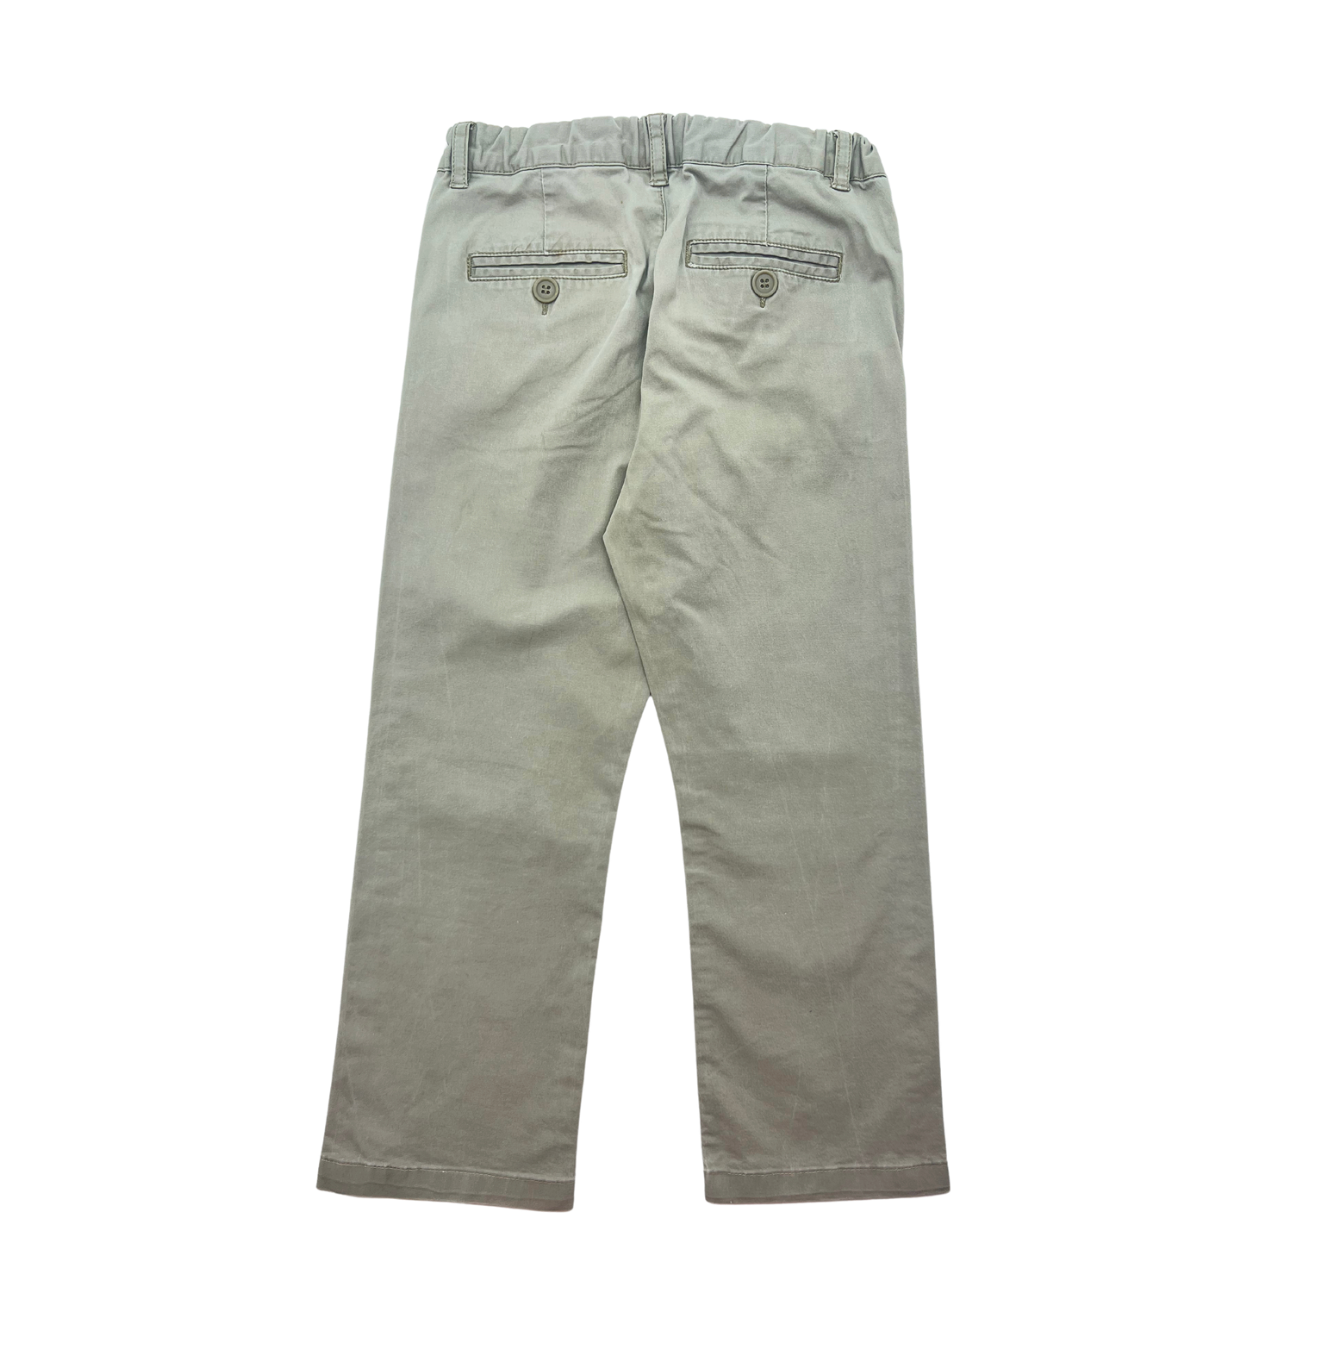 BONPOINT - Beige pants - 6 years old